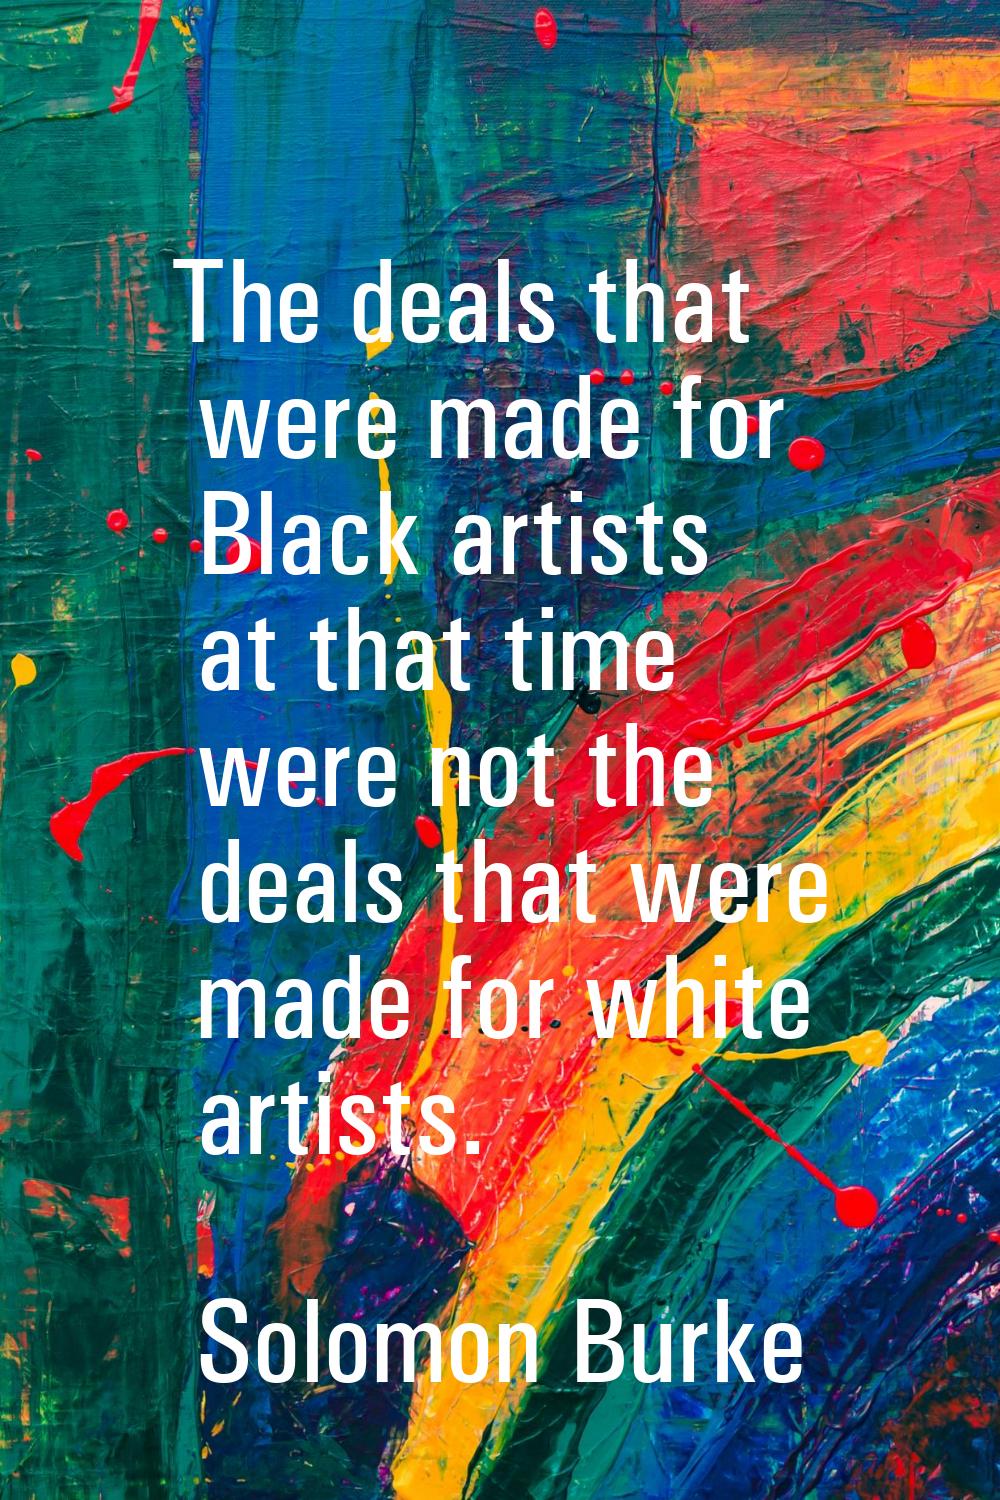 The deals that were made for Black artists at that time were not the deals that were made for white